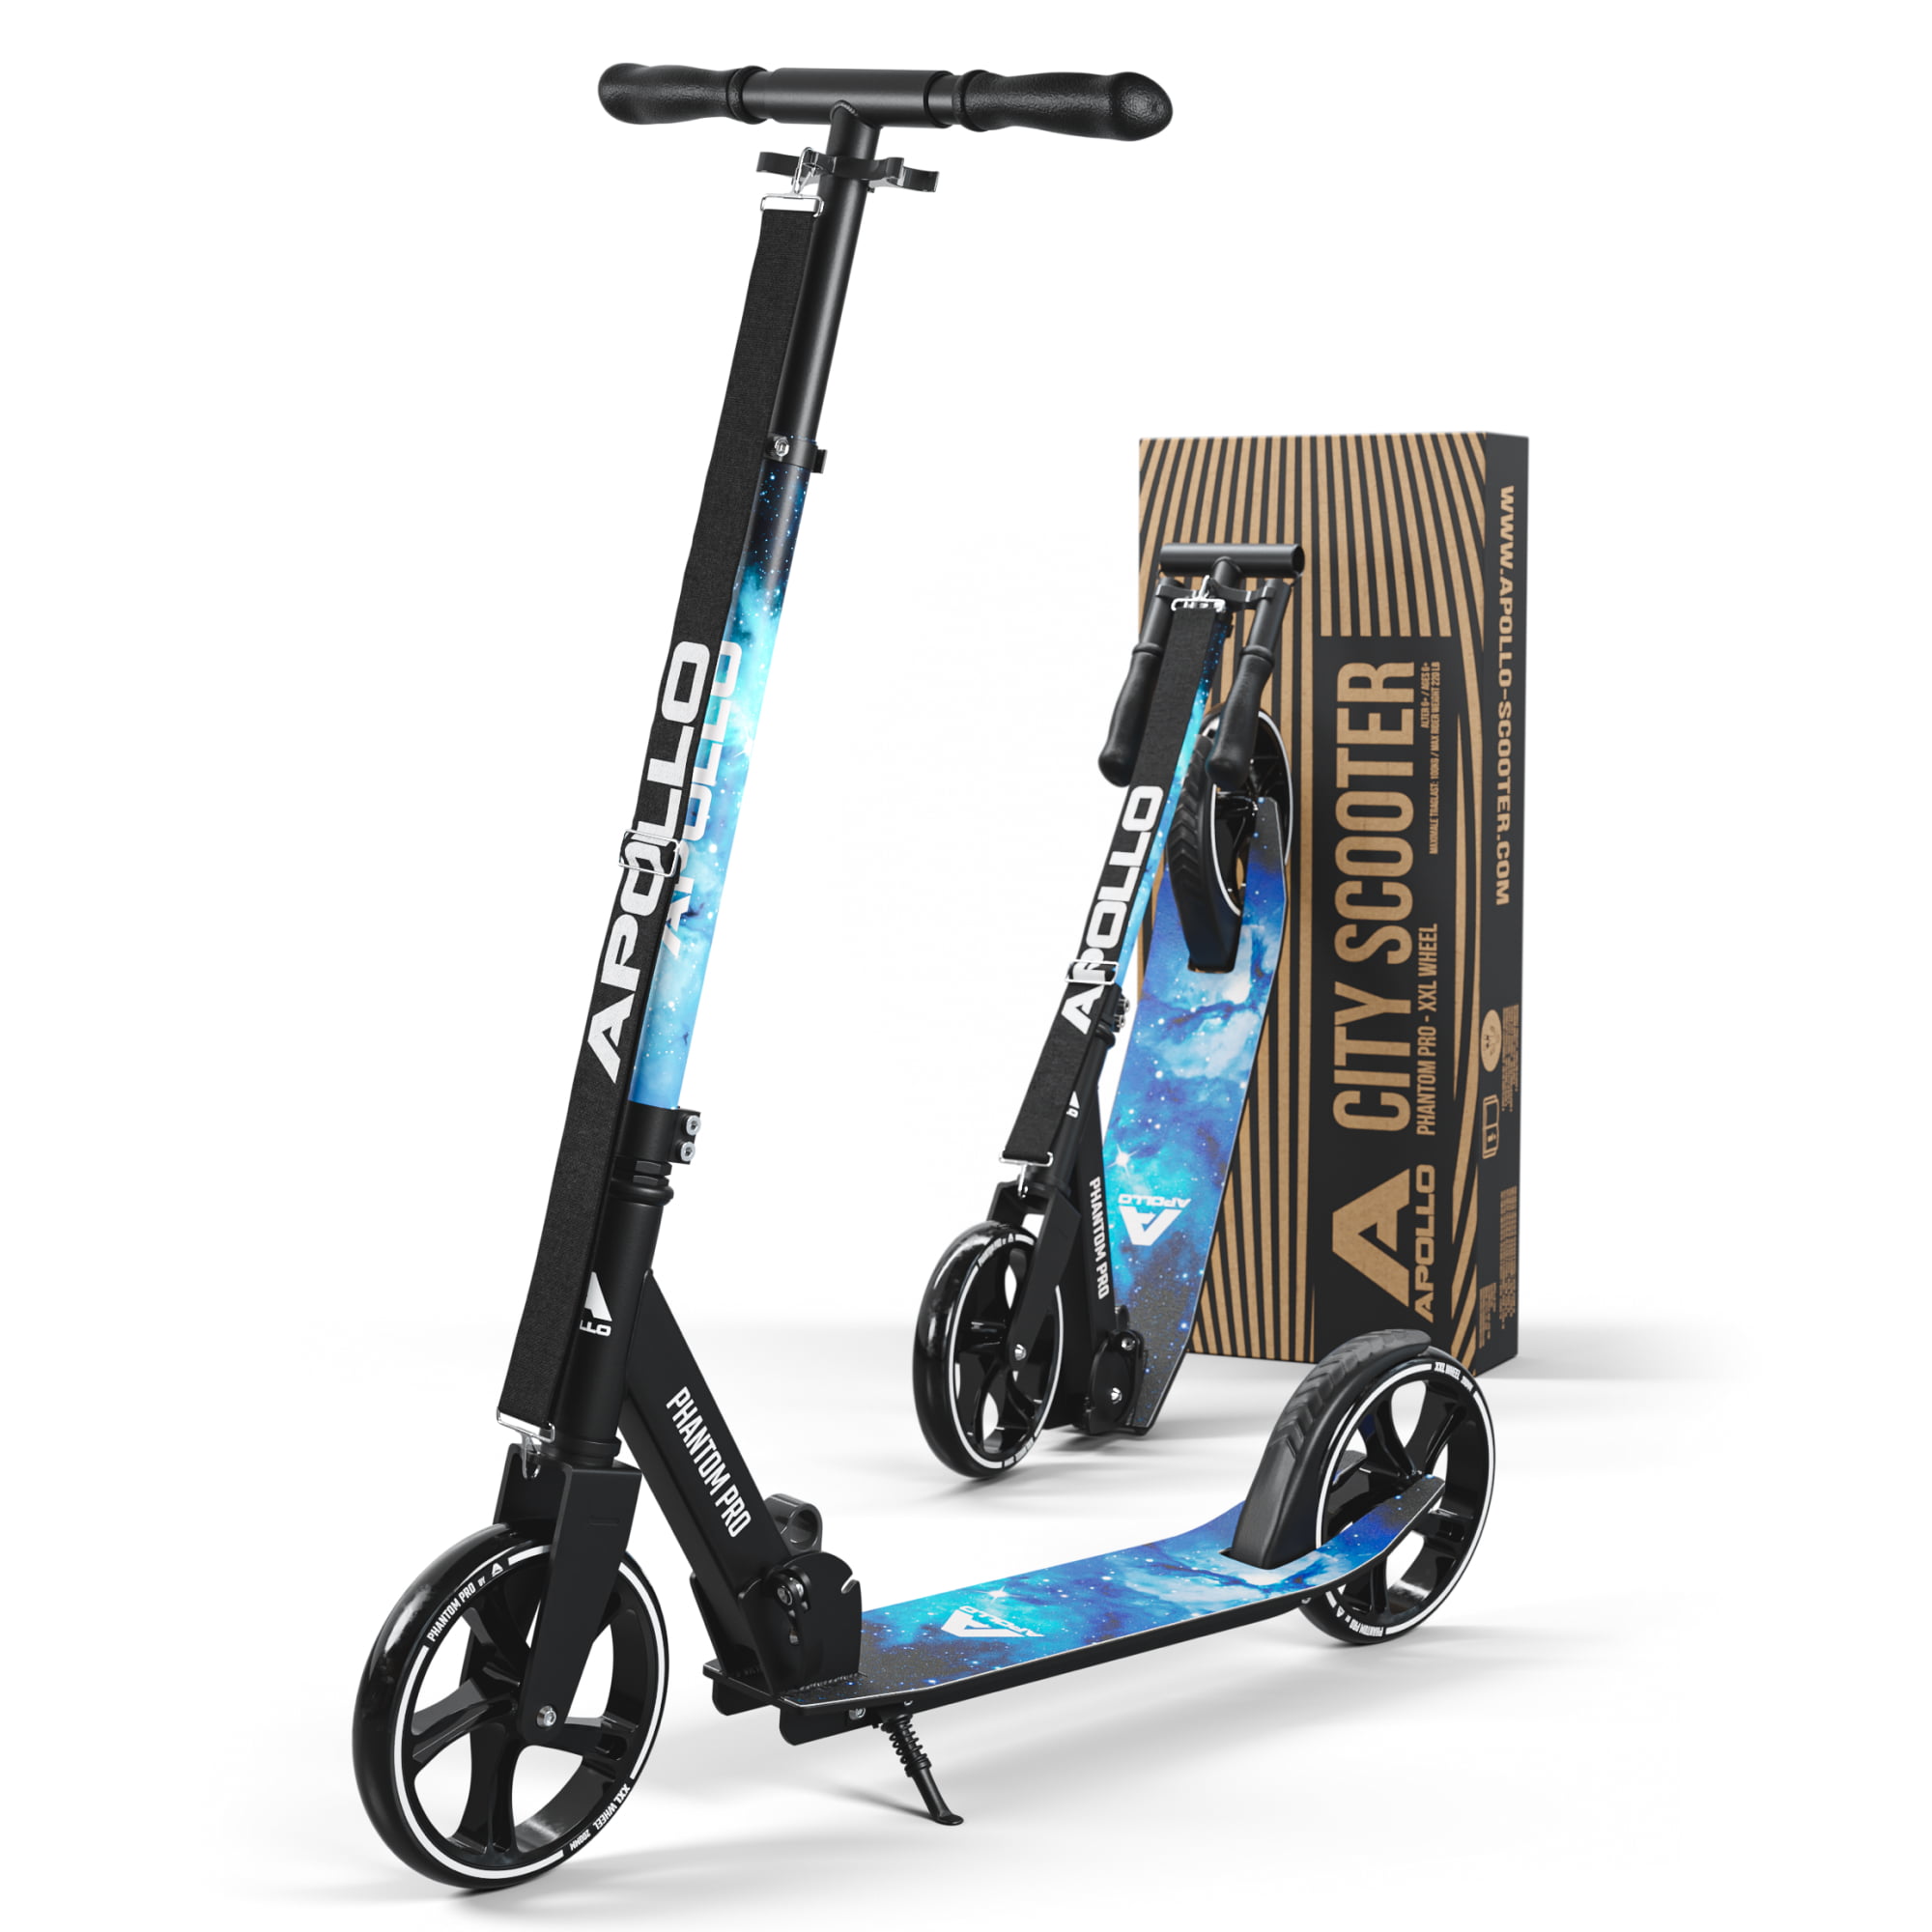 WIN.MAX Kick Scooter for Adults and Teens,Disc Brake for More Safe，with 200mm LED Wheels,Foldable Handle with 4 Adjustment Levels,220 Lbs Weight Capacity，Scooters for Kids 12 Years and up